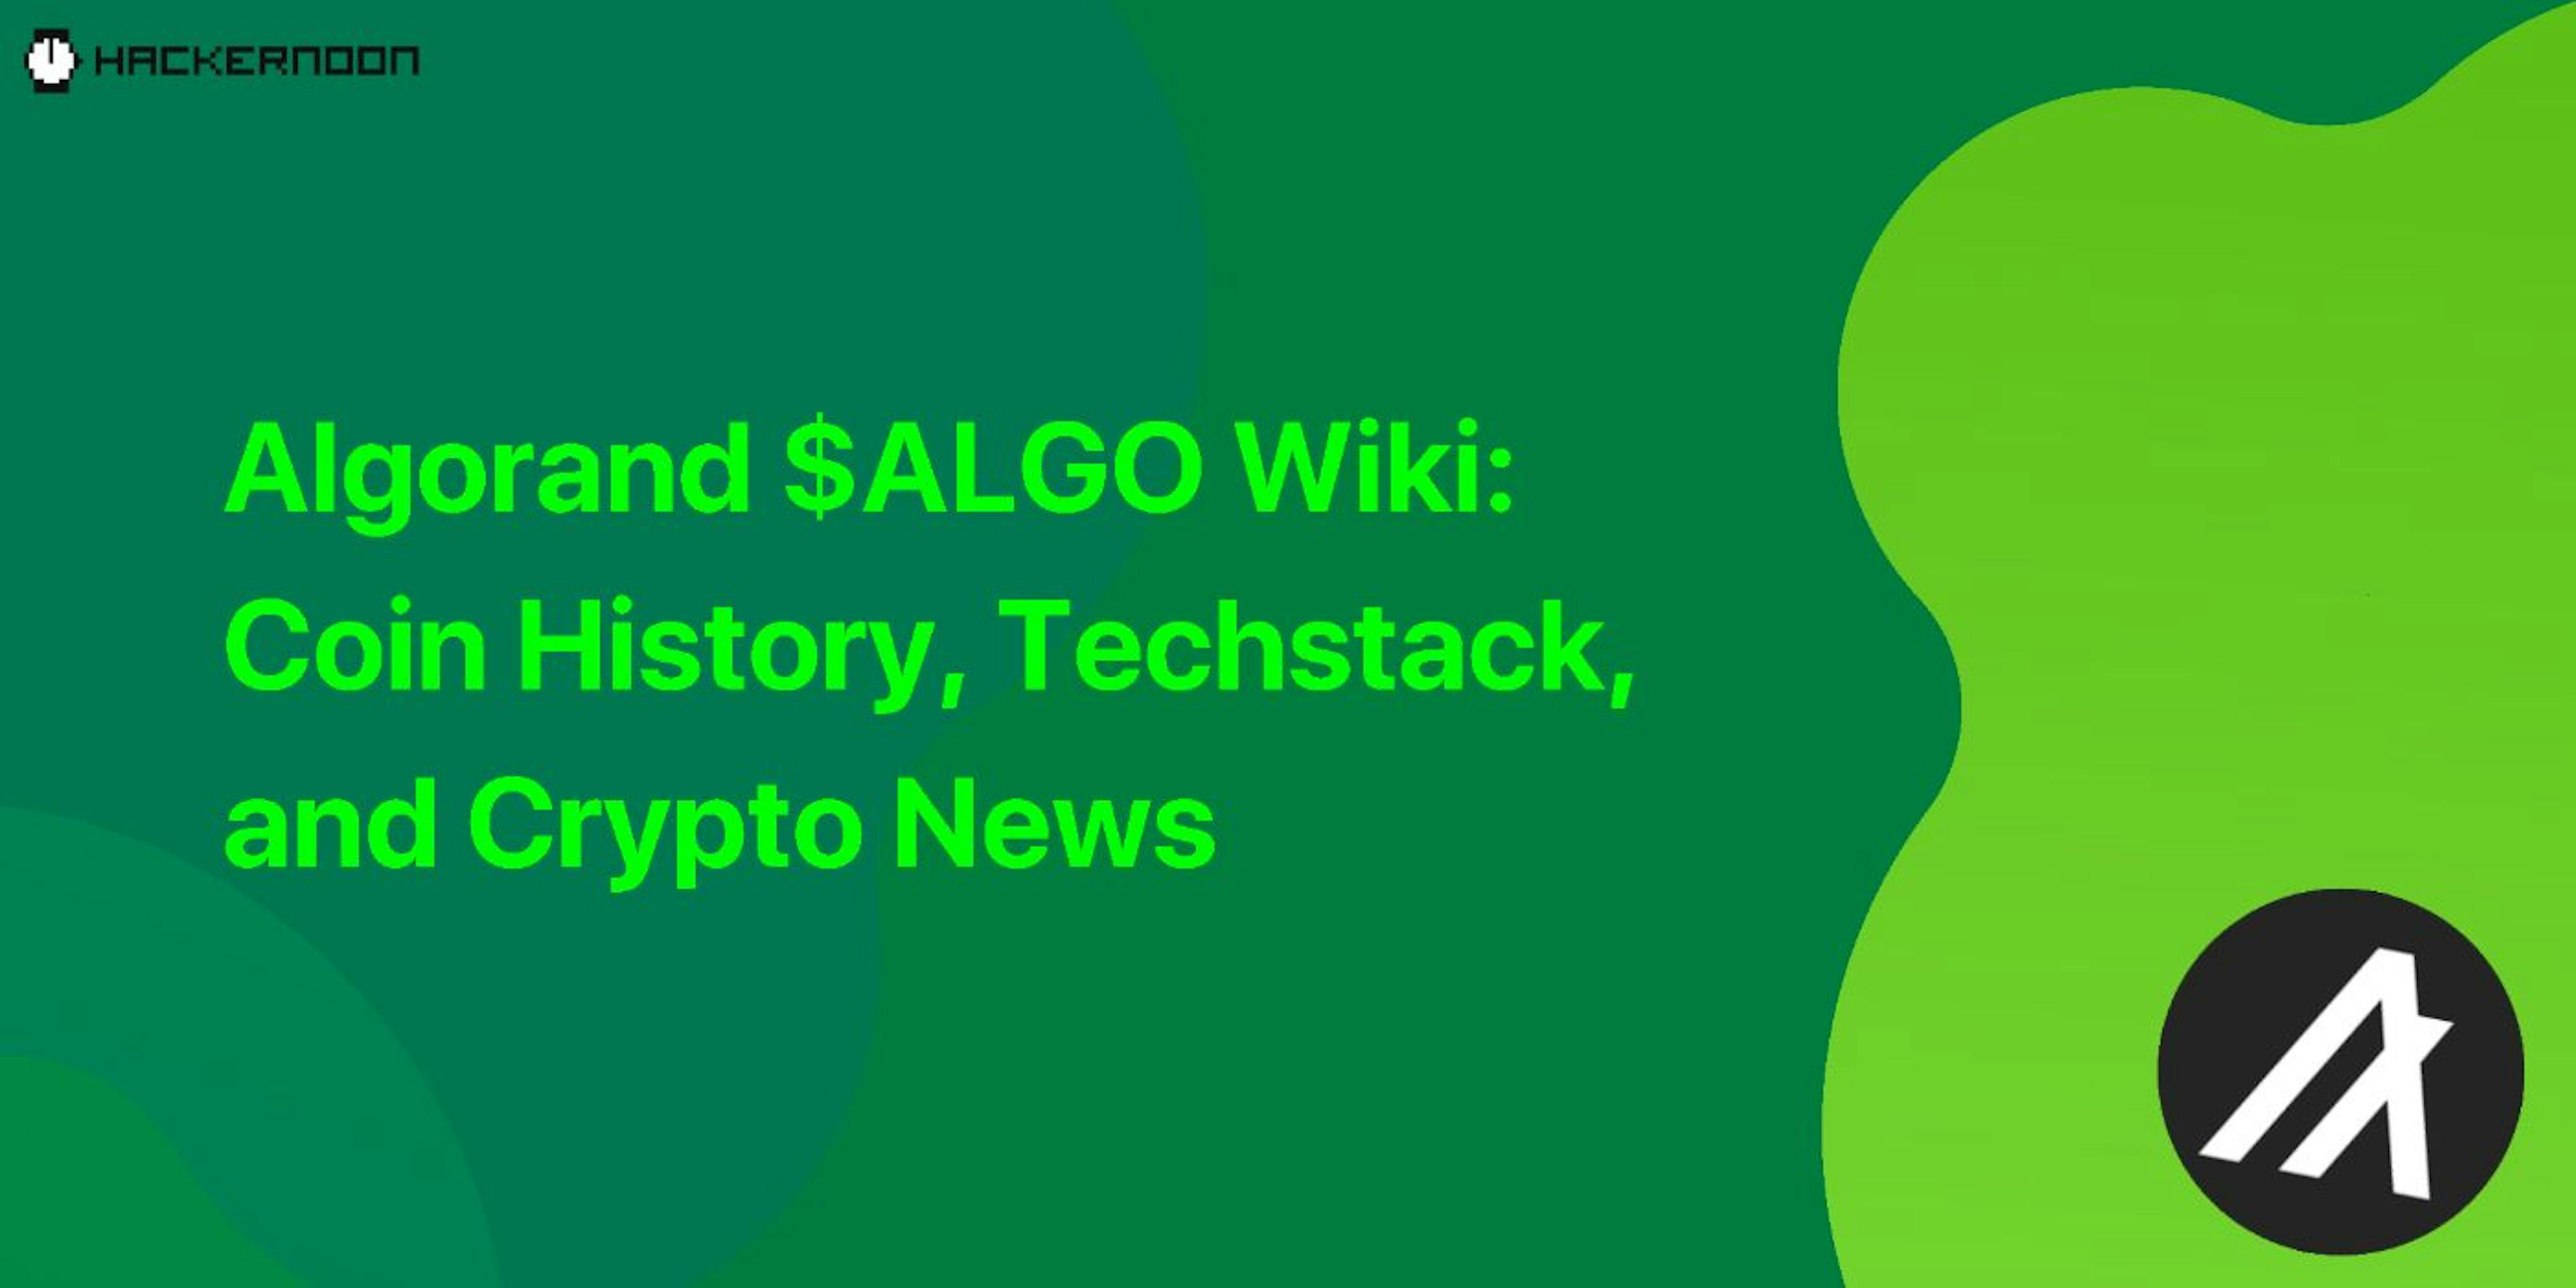 featured image - Algorand $ALGO Wiki: Coin History, Techstack, and Crypto News